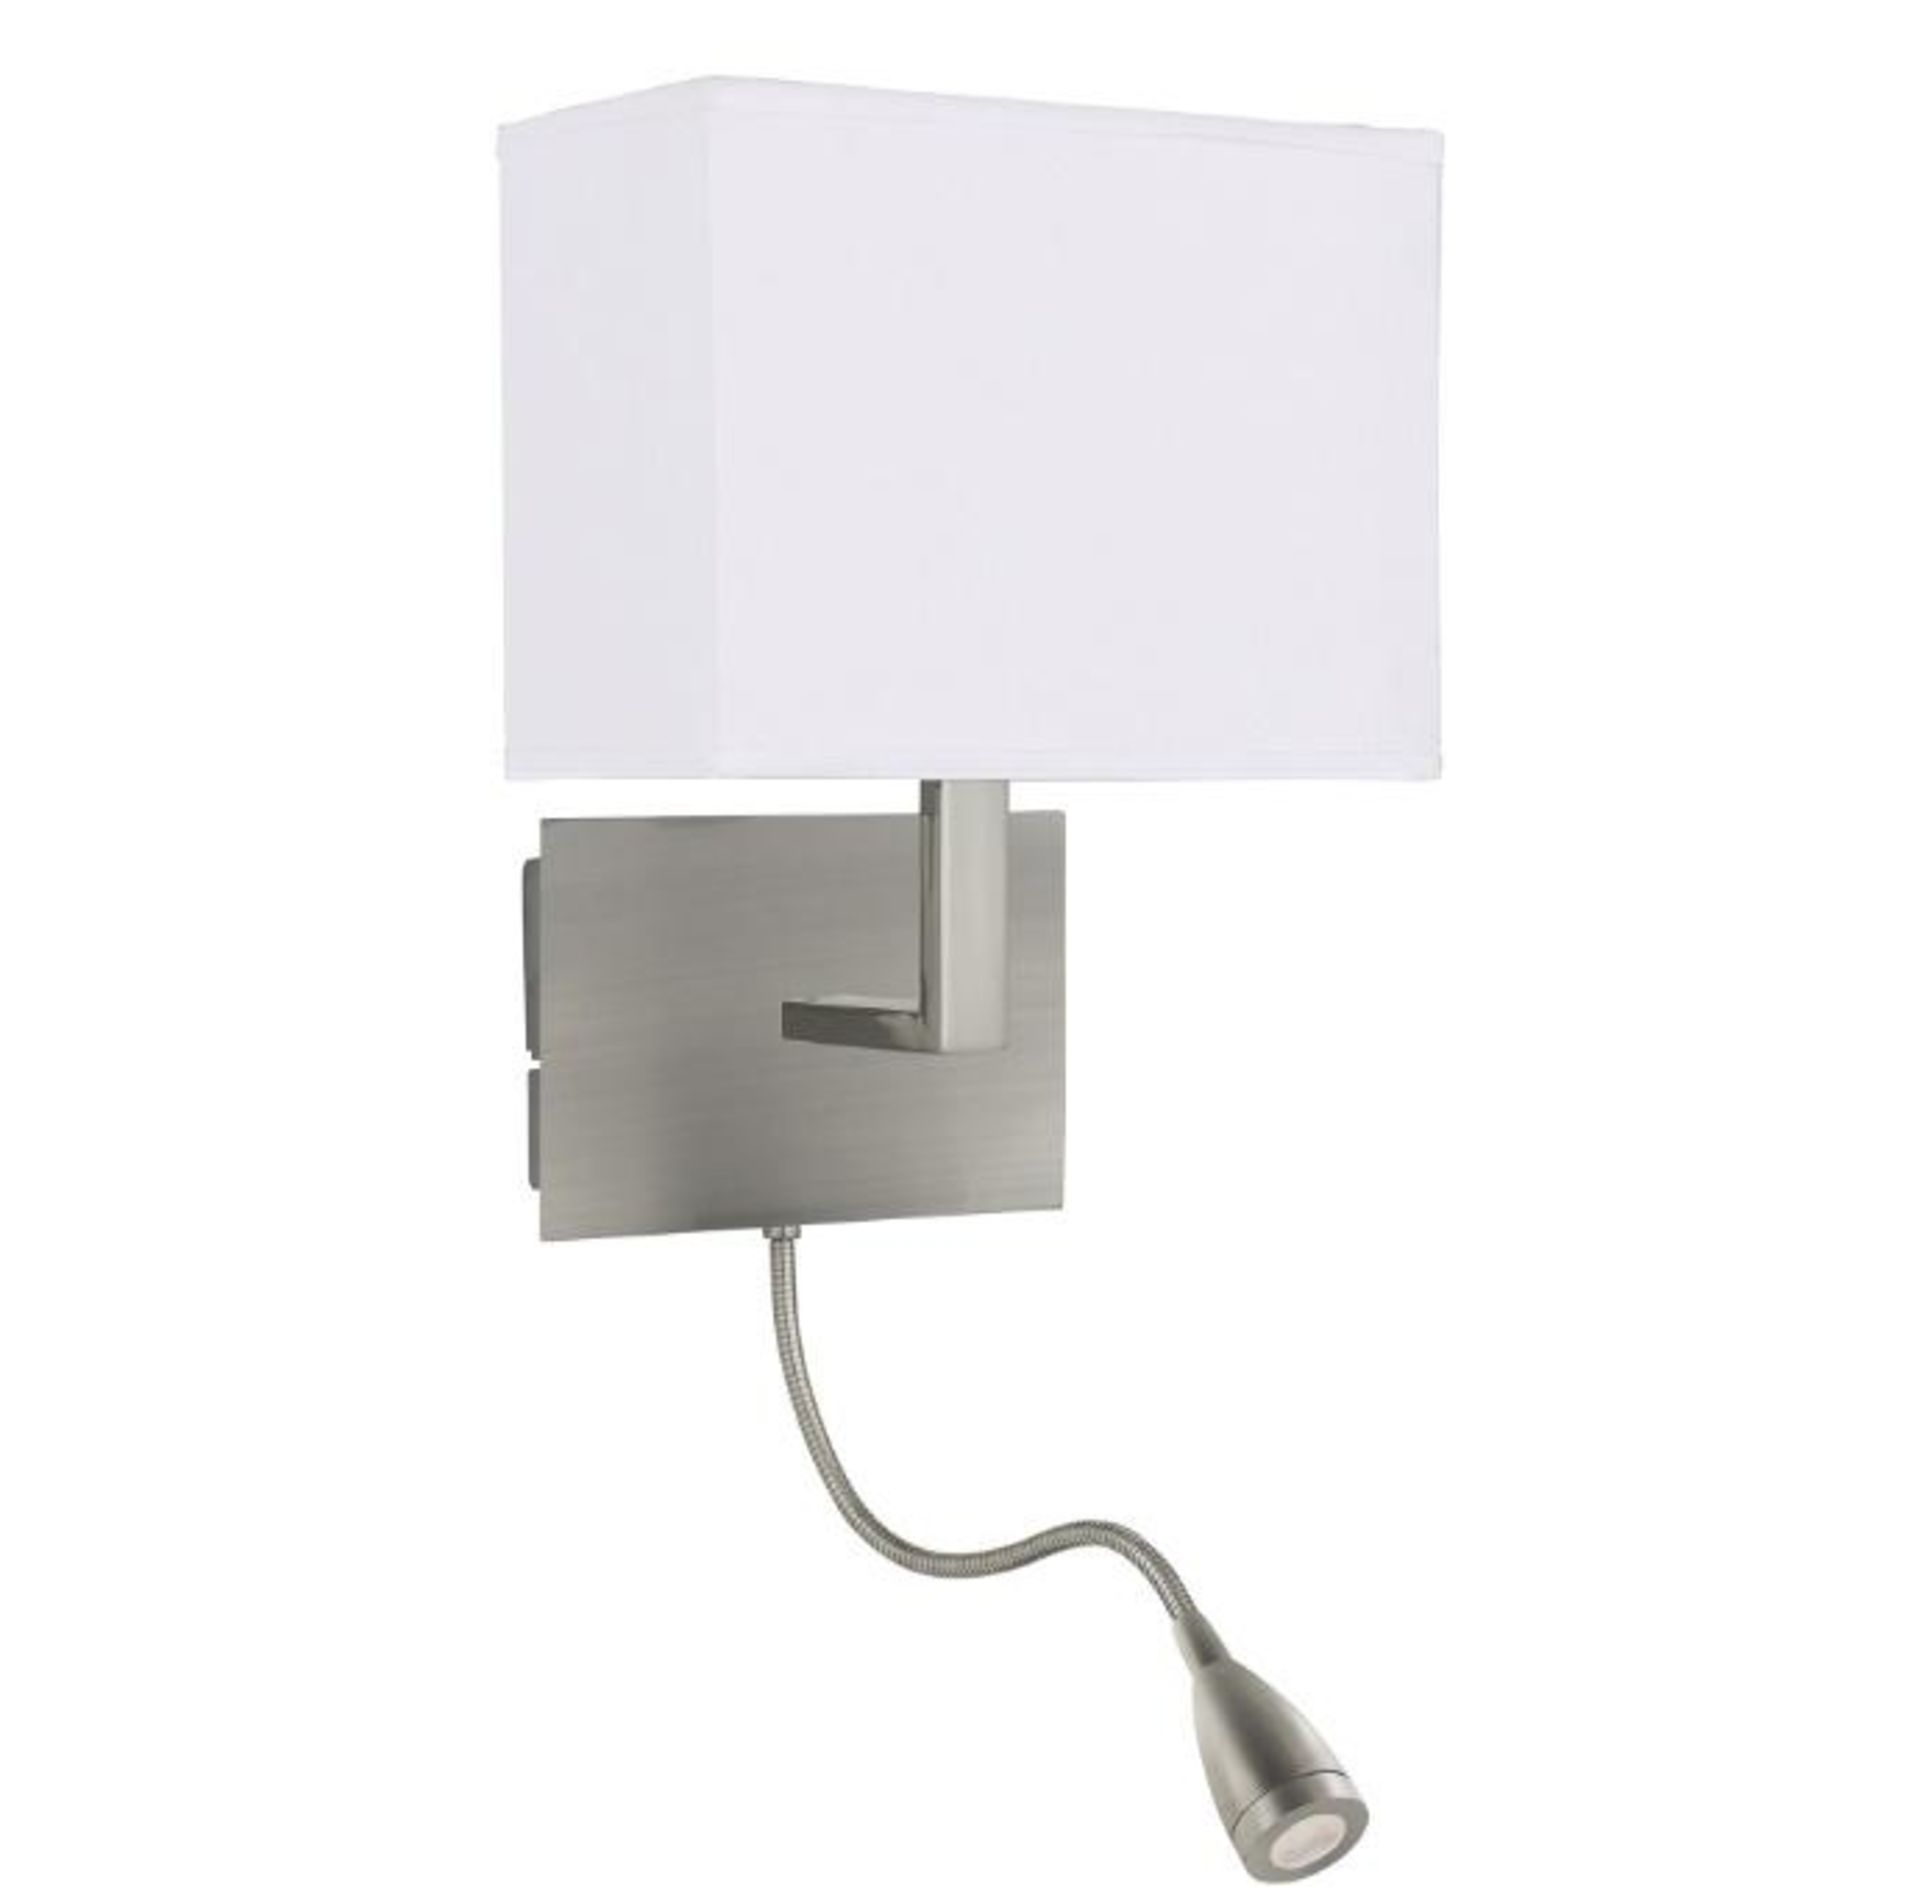 1 x Oblong Satin Silver Wall Light White Shade LED Flexi-arm, Switched - Ex Display Stock - CL323 -